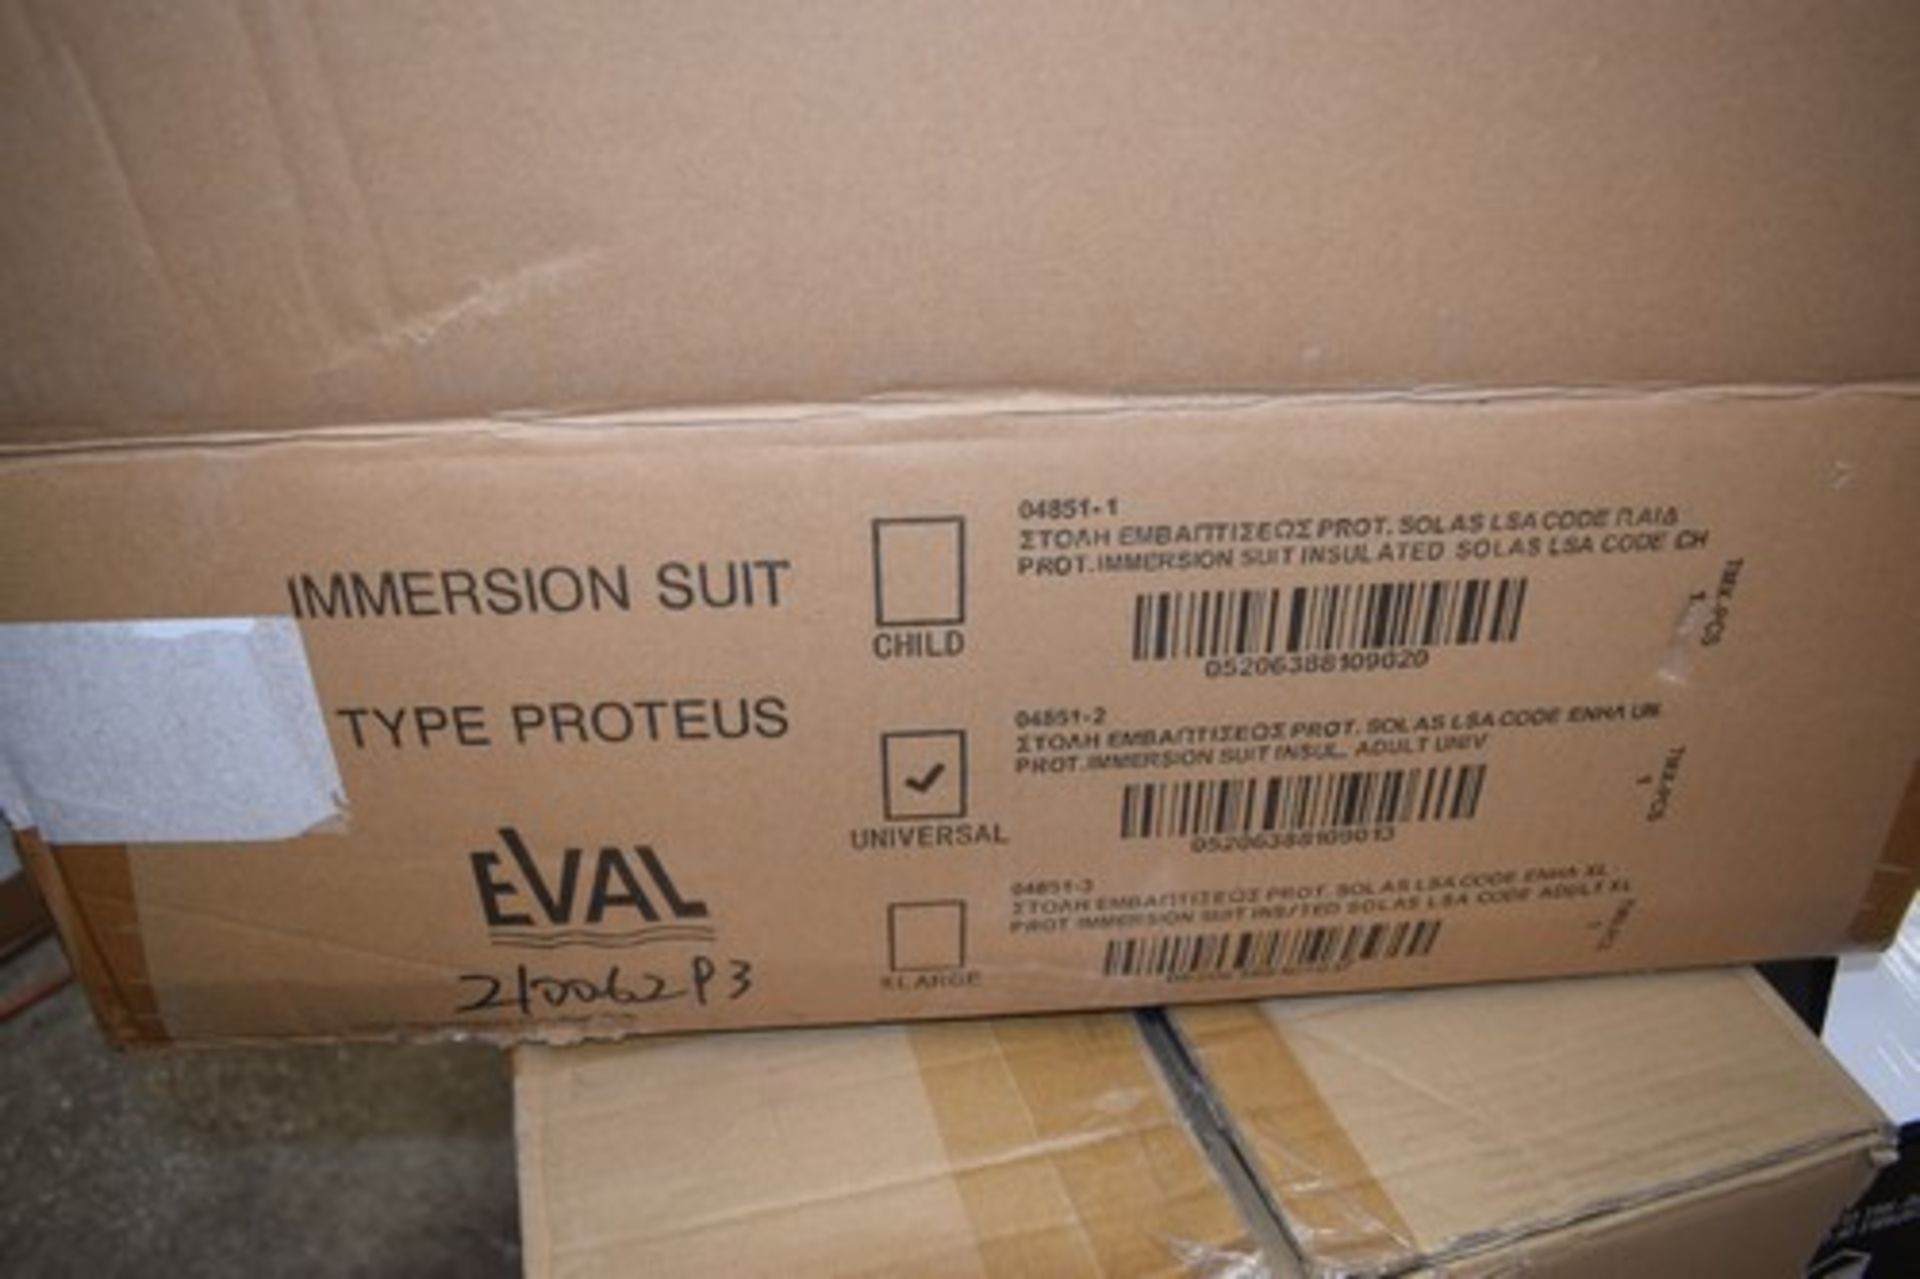 1 x Eval Proteus adult insulated immersion suit - new in box (ES11) - Image 2 of 2